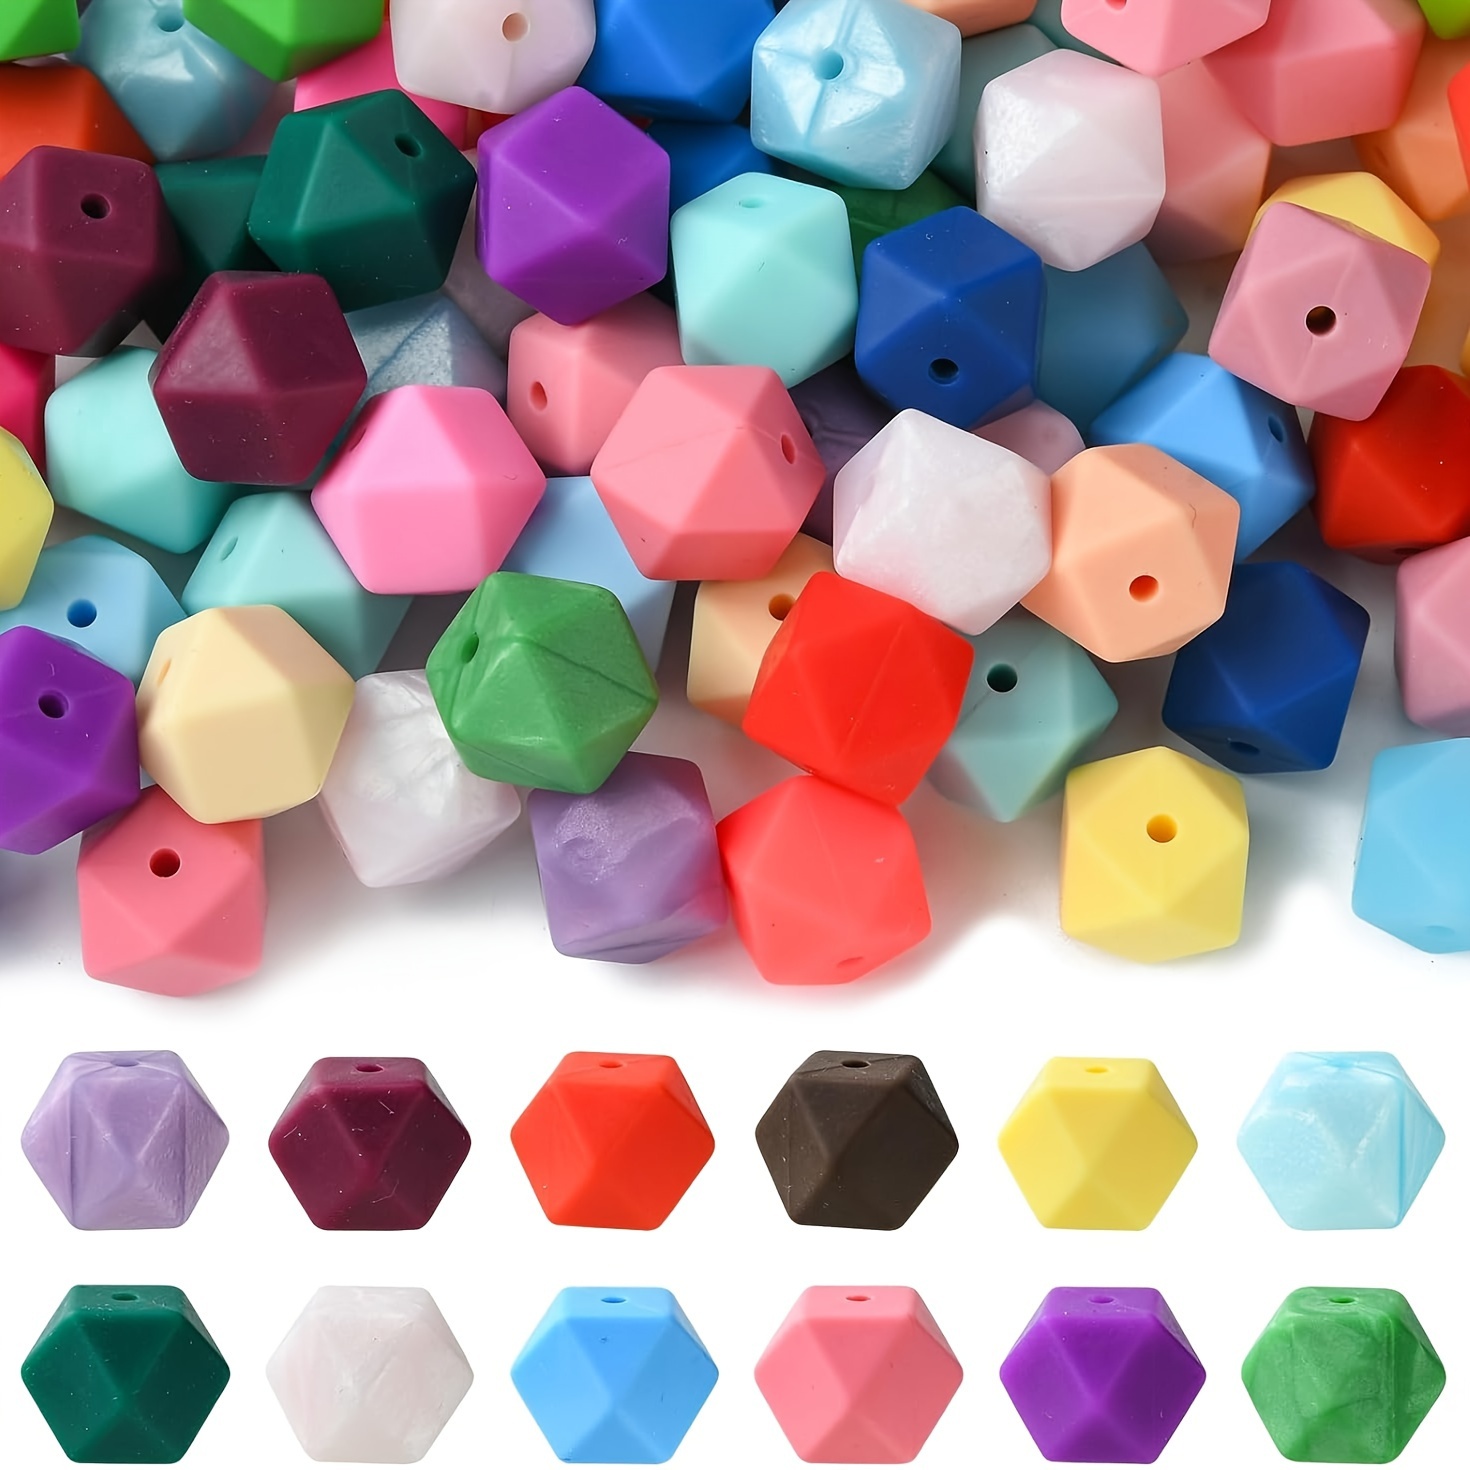 

36pcs Silicone 12 Styles Colorful Polygonal With Holes Bulk Beads For Jewelry Making Handmade Diy Necklace Bracelet Key Bag Chain Pen Lanyard And Other Craft Supplies